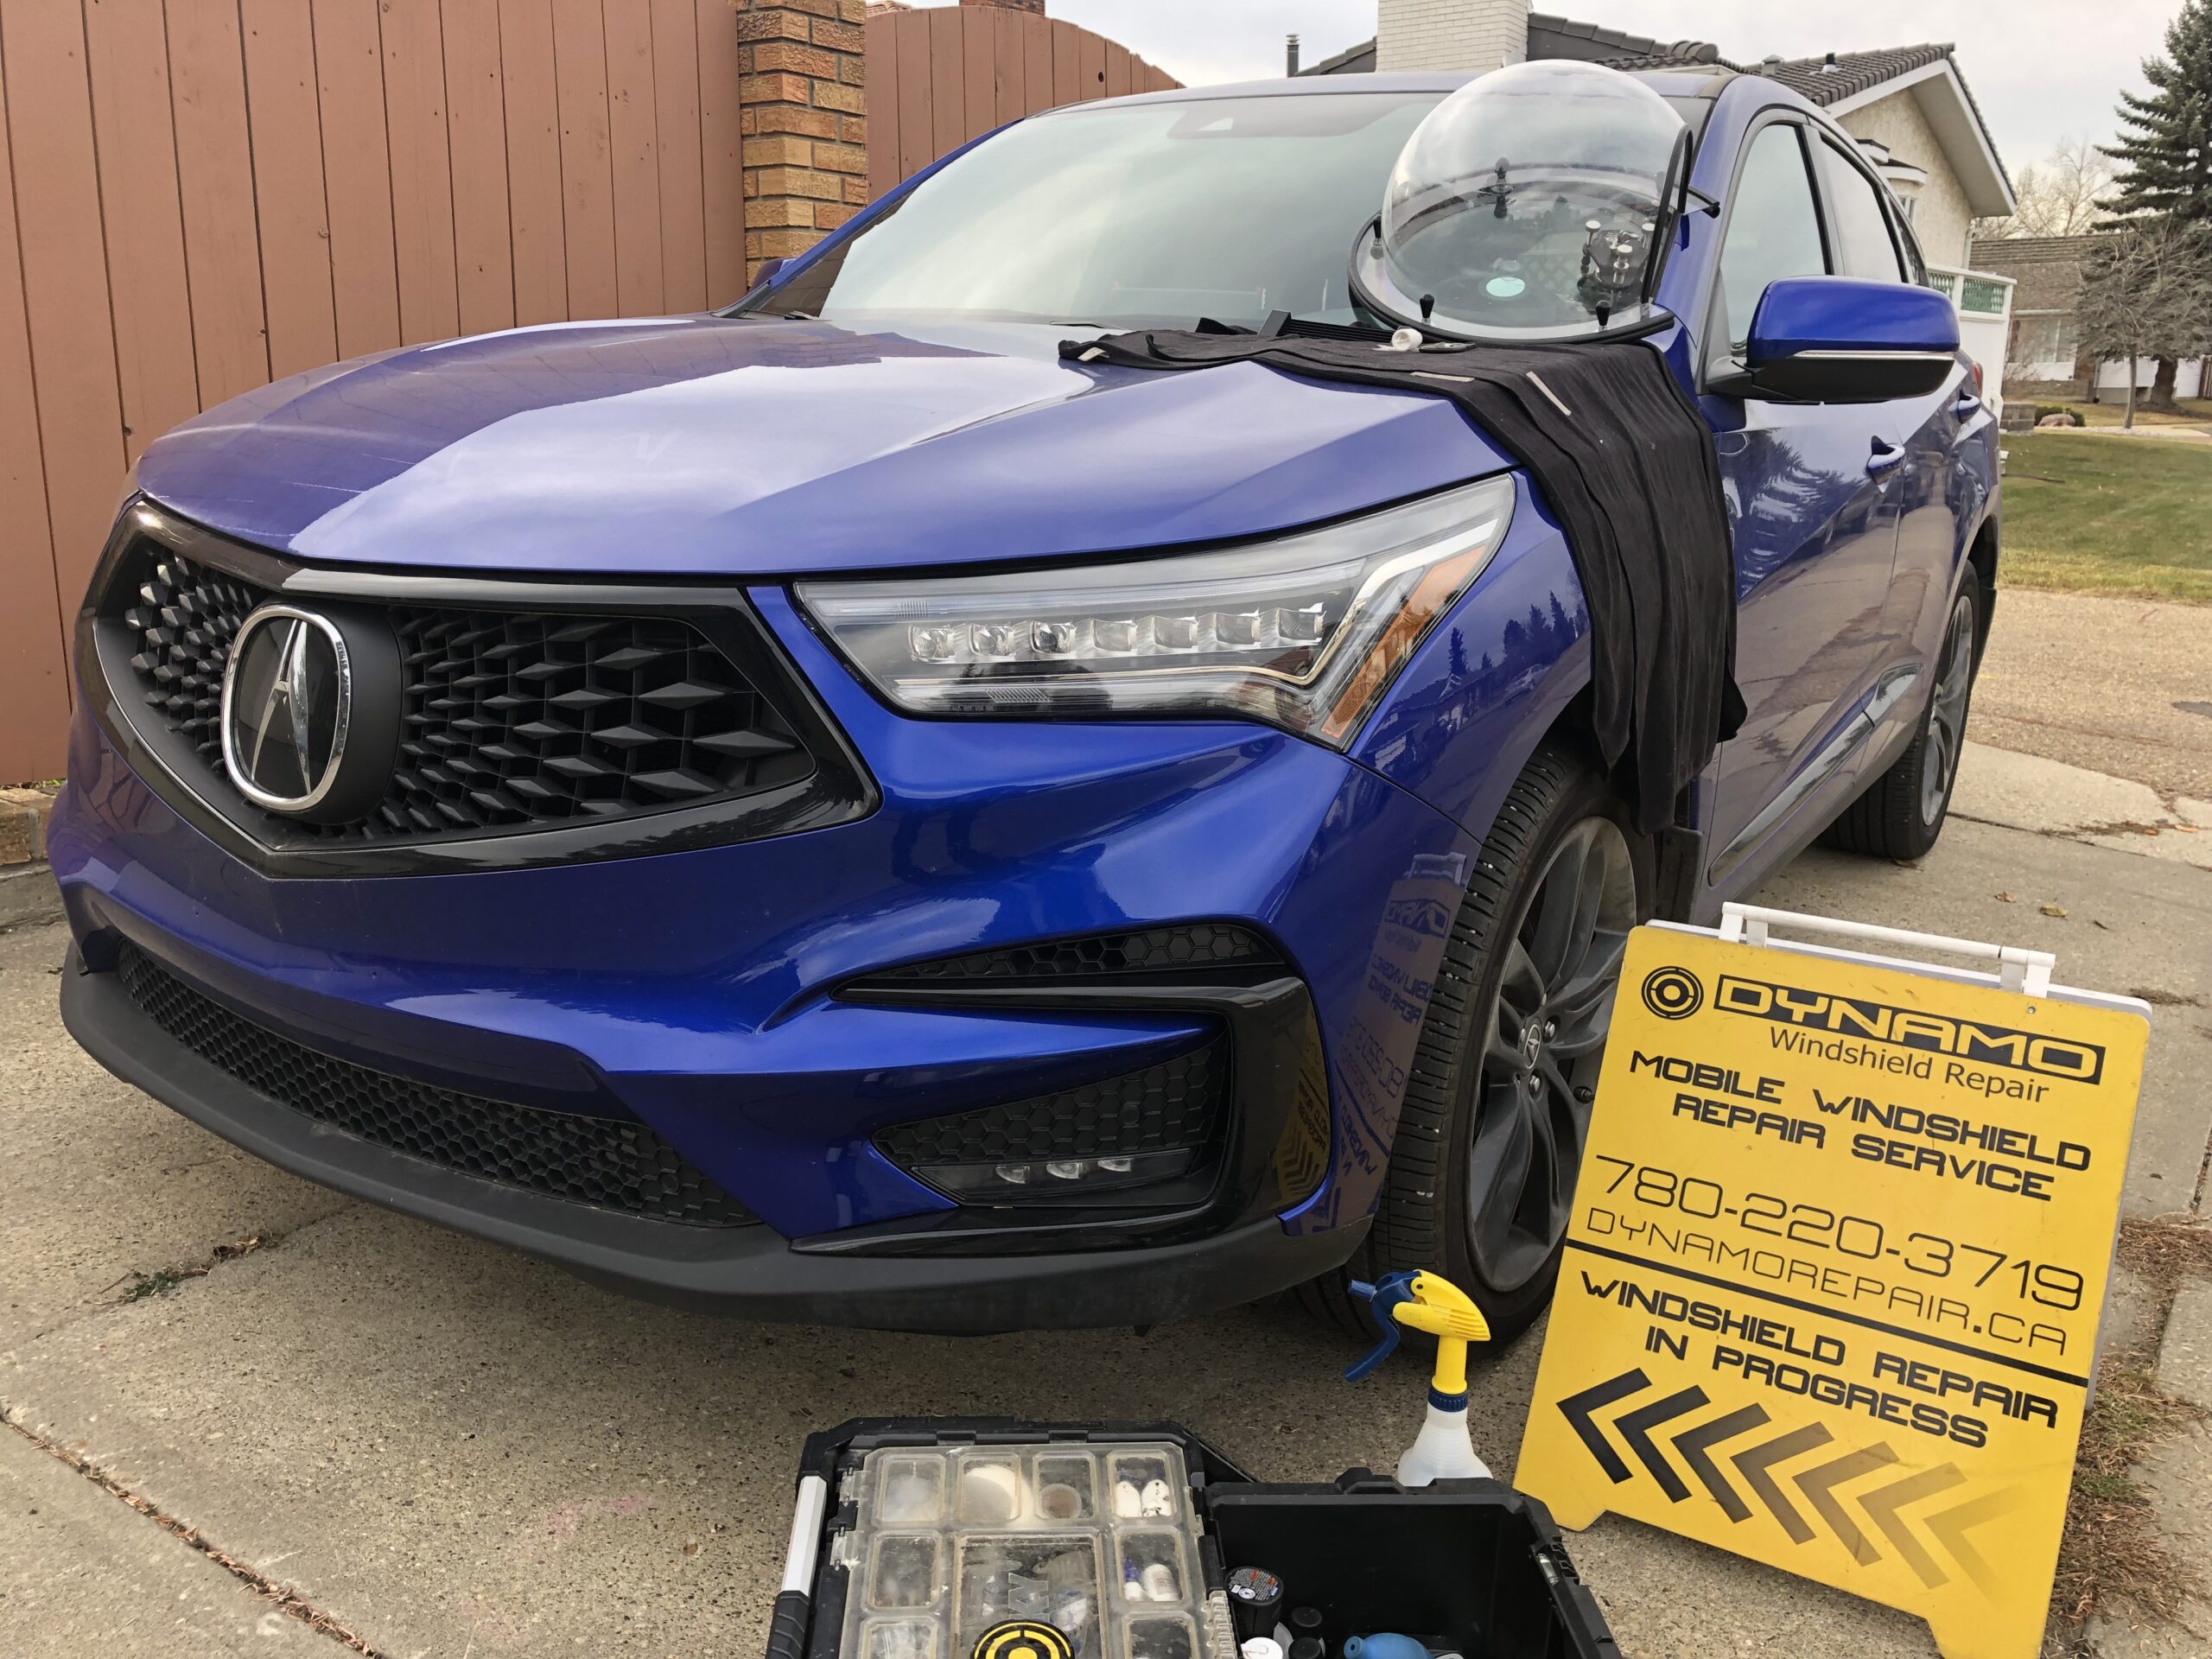 windshield chip repair on a blue Acura 